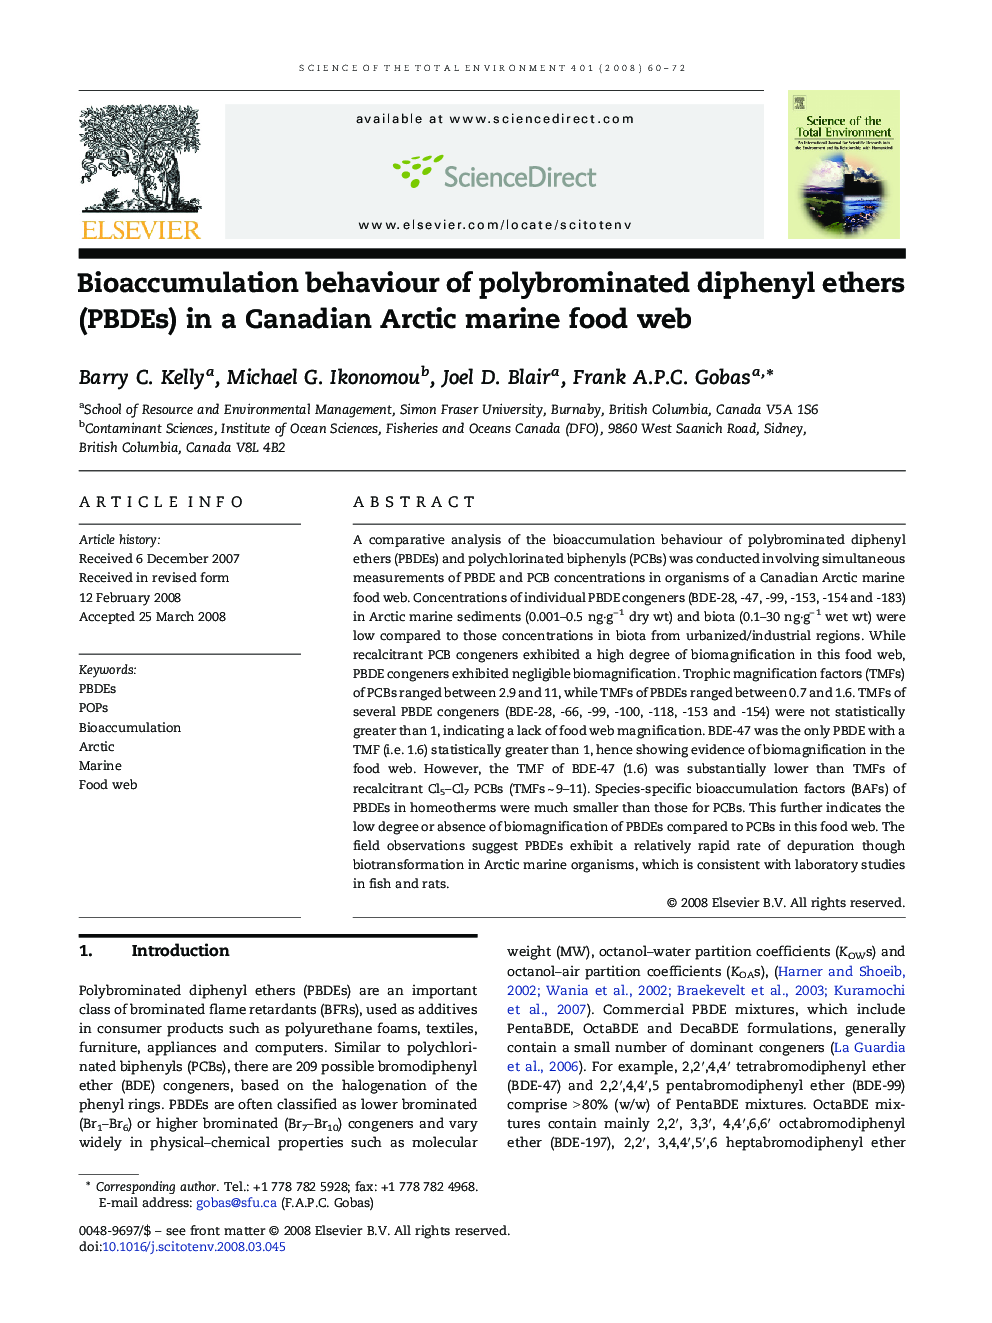 Bioaccumulation behaviour of polybrominated diphenyl ethers (PBDEs) in a Canadian Arctic marine food web